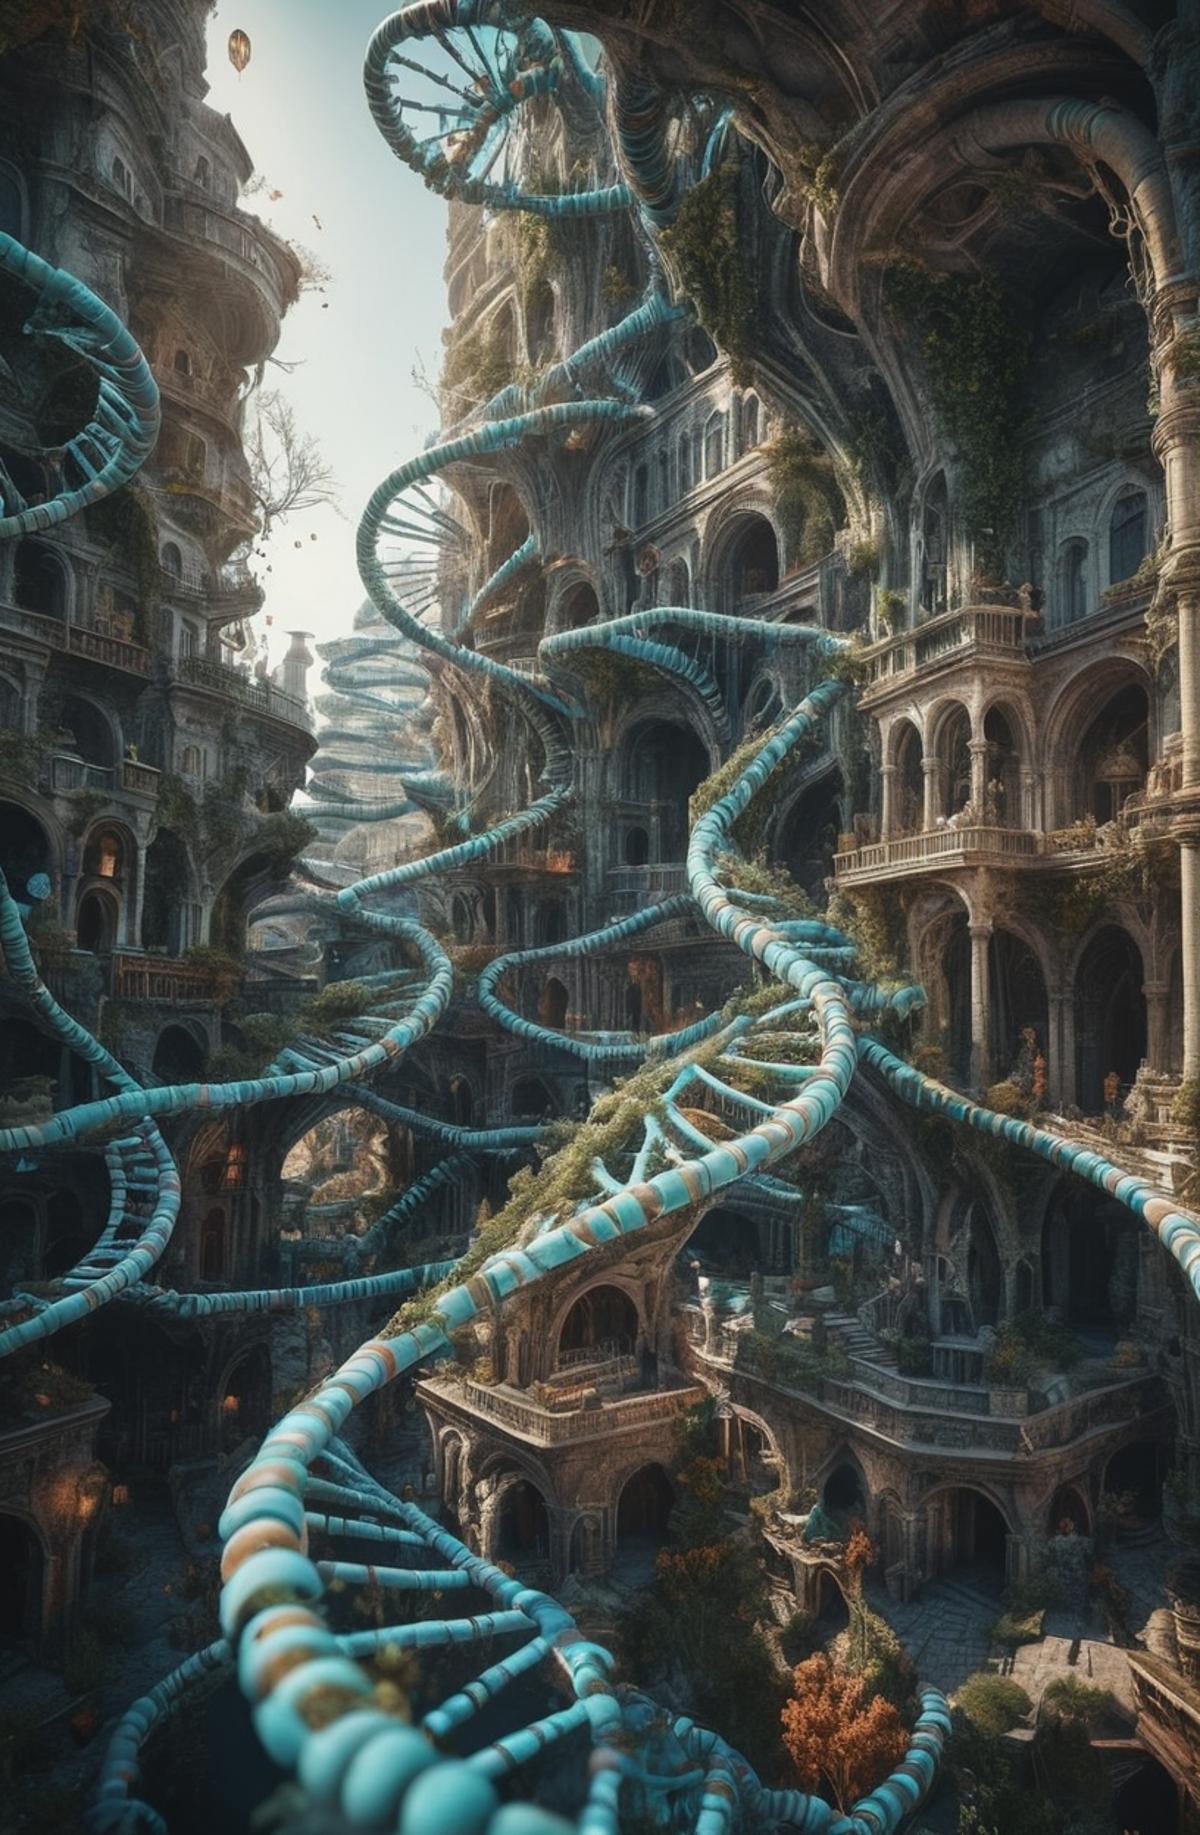 An artistic drawing of a futuristic city with a labyrinth of blue and white tracks and buildings.